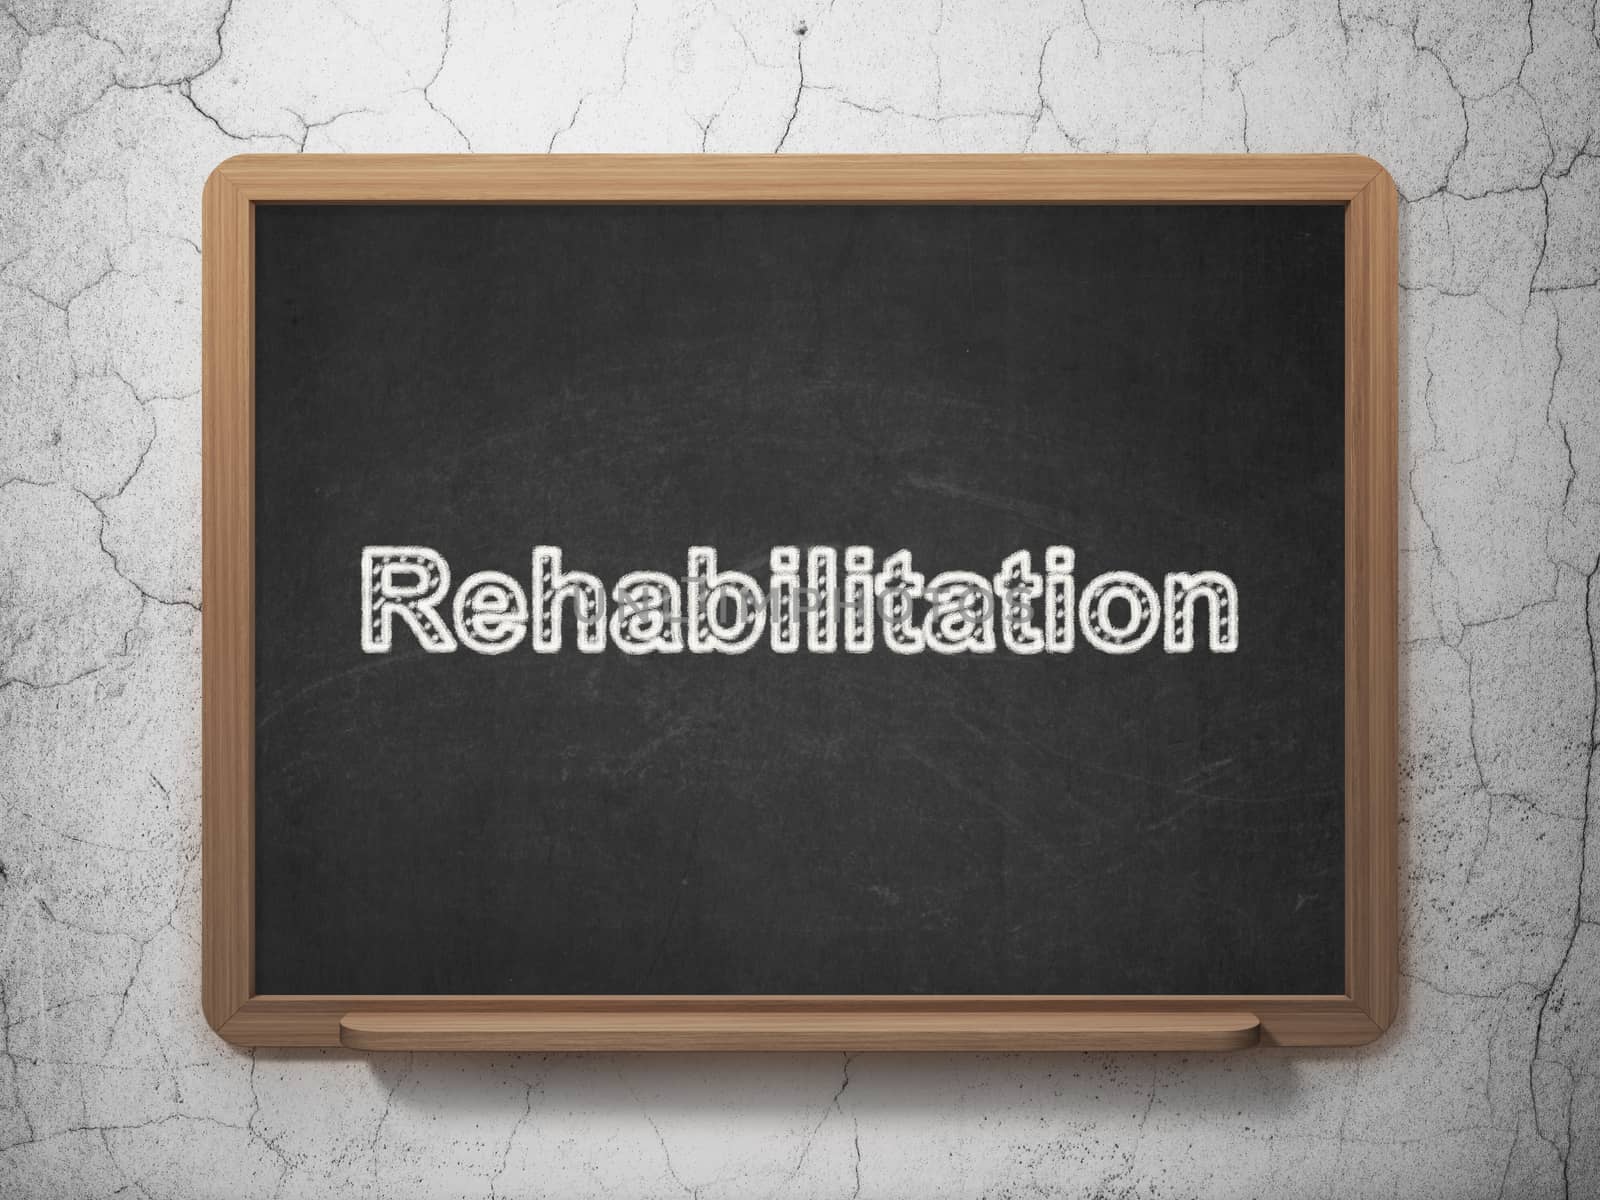 Healthcare concept: text Rehabilitation on Black chalkboard on grunge wall background, 3D rendering